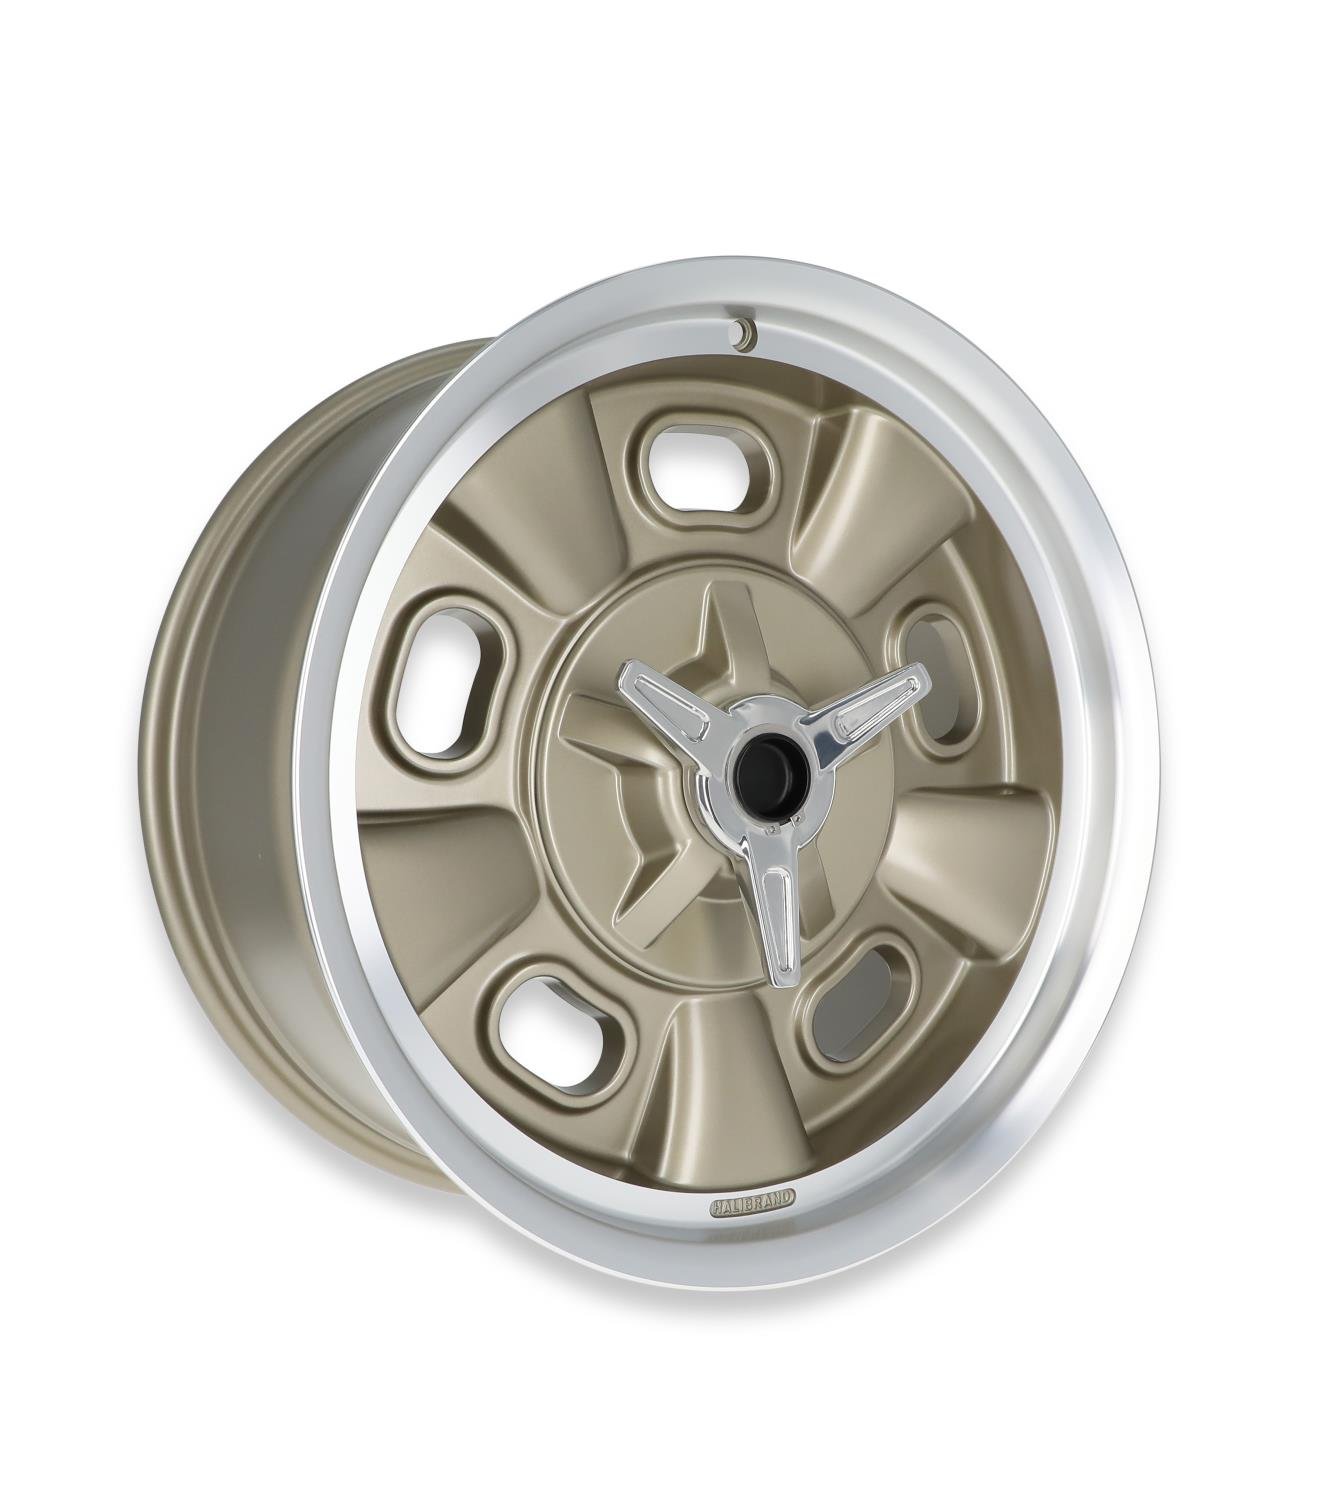 Indy Roadster Wheel, Size: 19x8.5